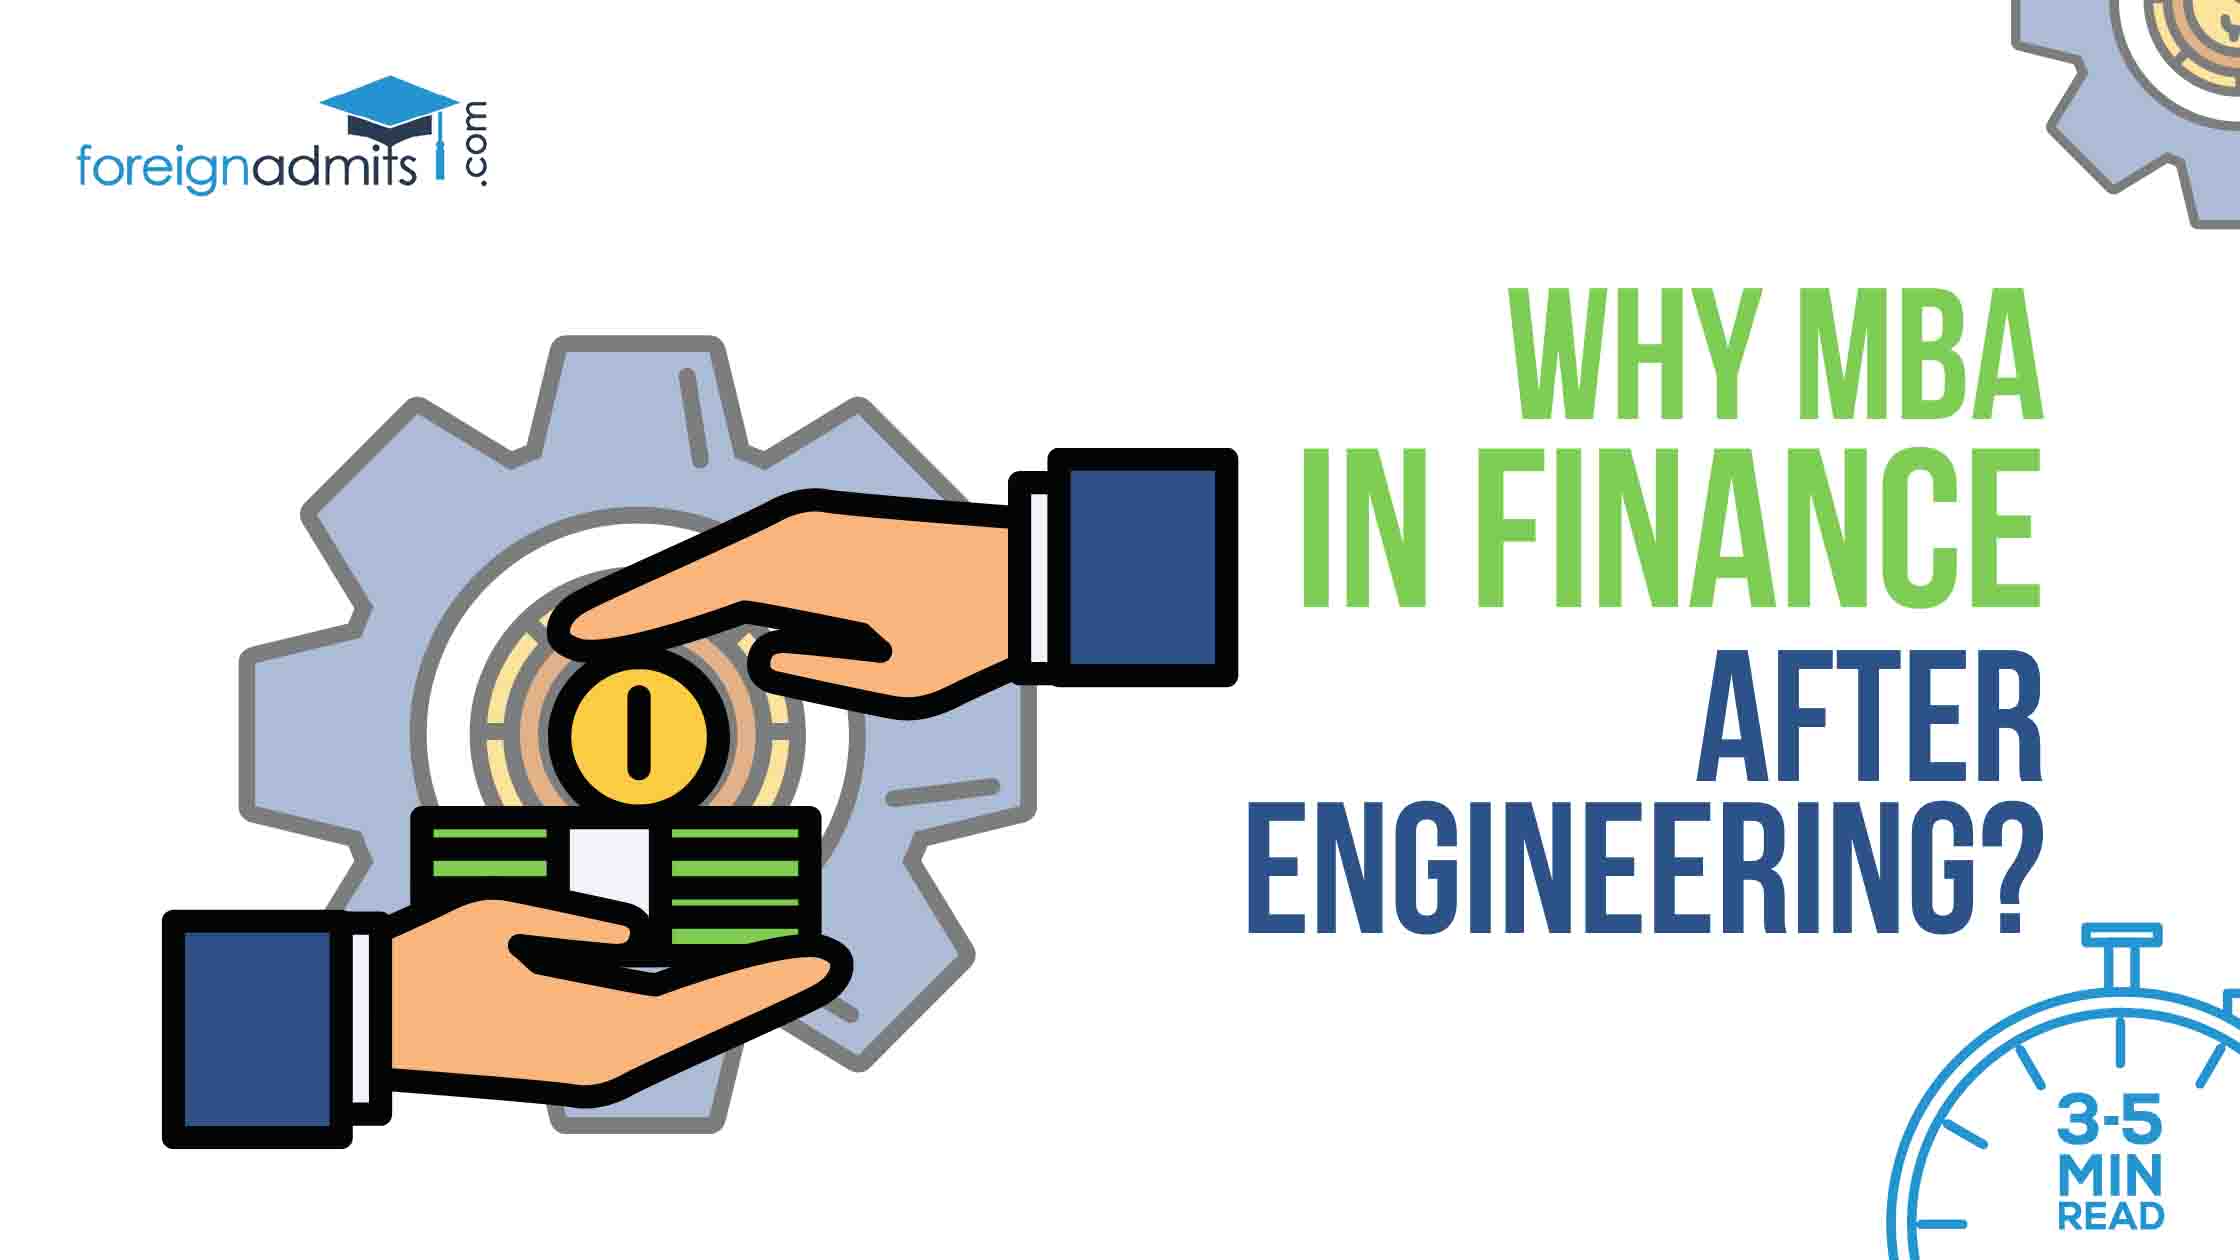 Why MBA in Finance After Engineering?